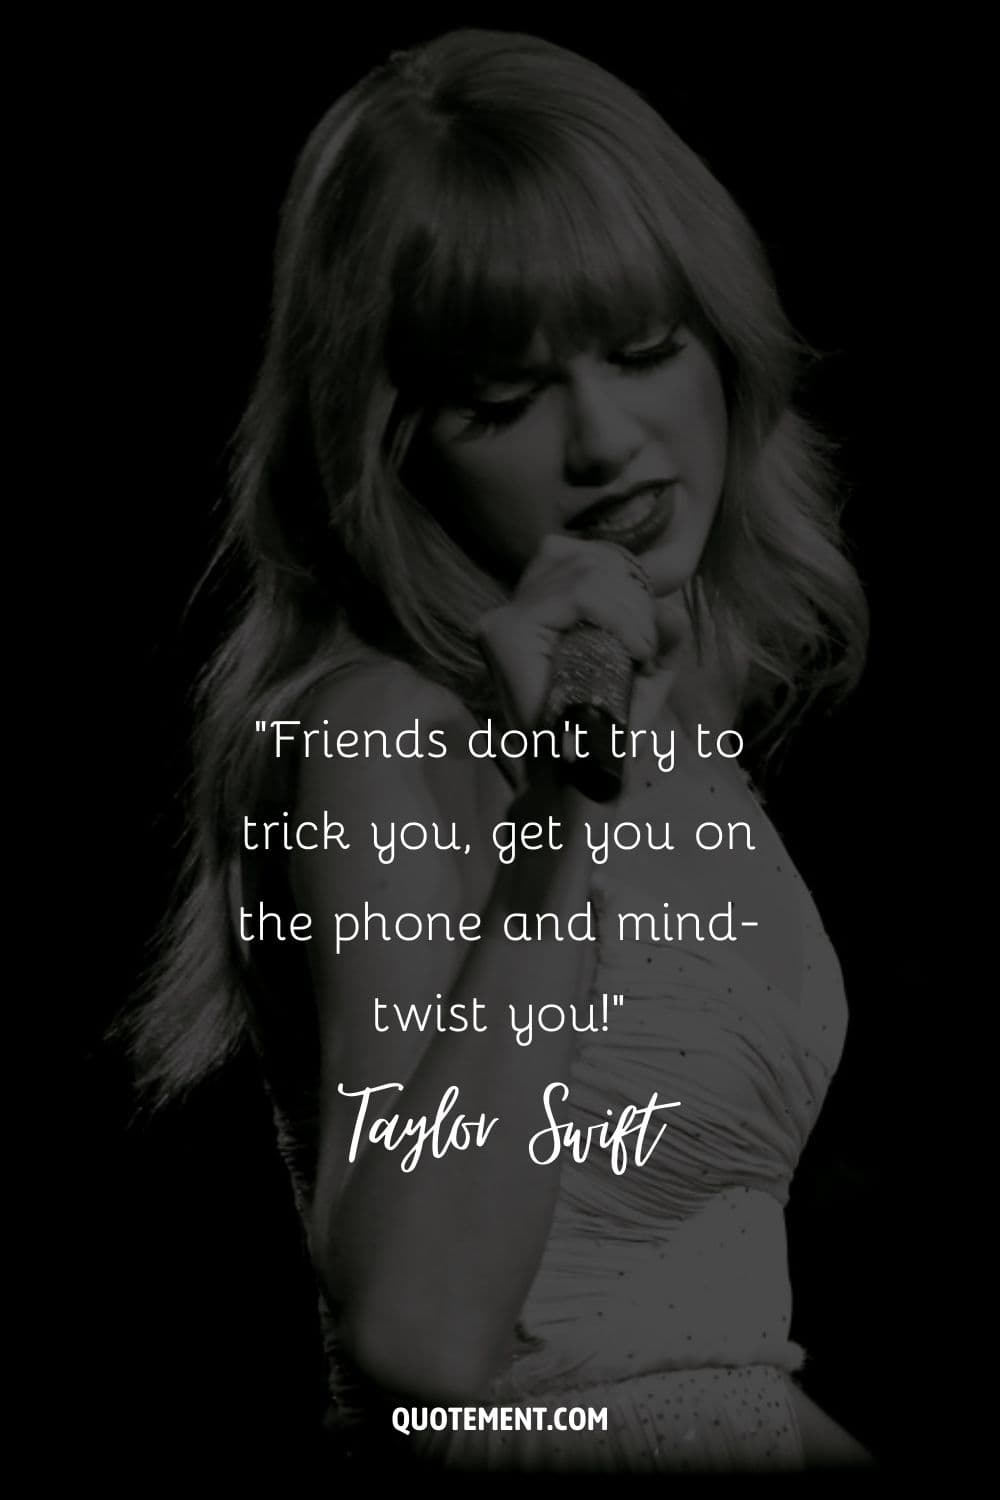 “Friends don't try to trick you, get you on the phone and mind-twist you!” ― Taylor SwifZ